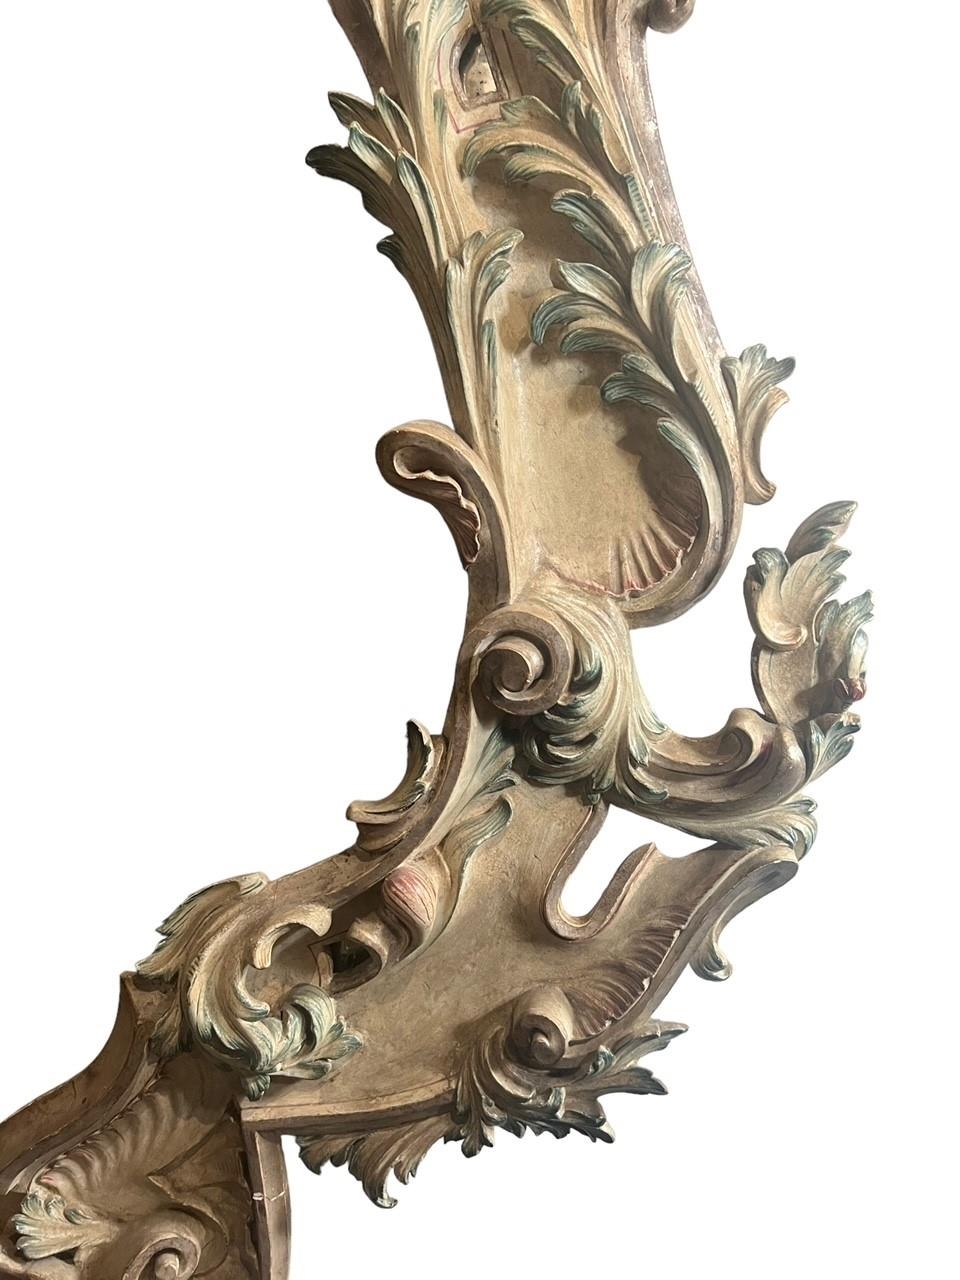 A VERY LARGE AND IMPRESSIVE 18TH CENTURY CARVED WOOD AND PAINTED ITALIAN VENETIAN ROCOCO MIRROR - Image 11 of 18